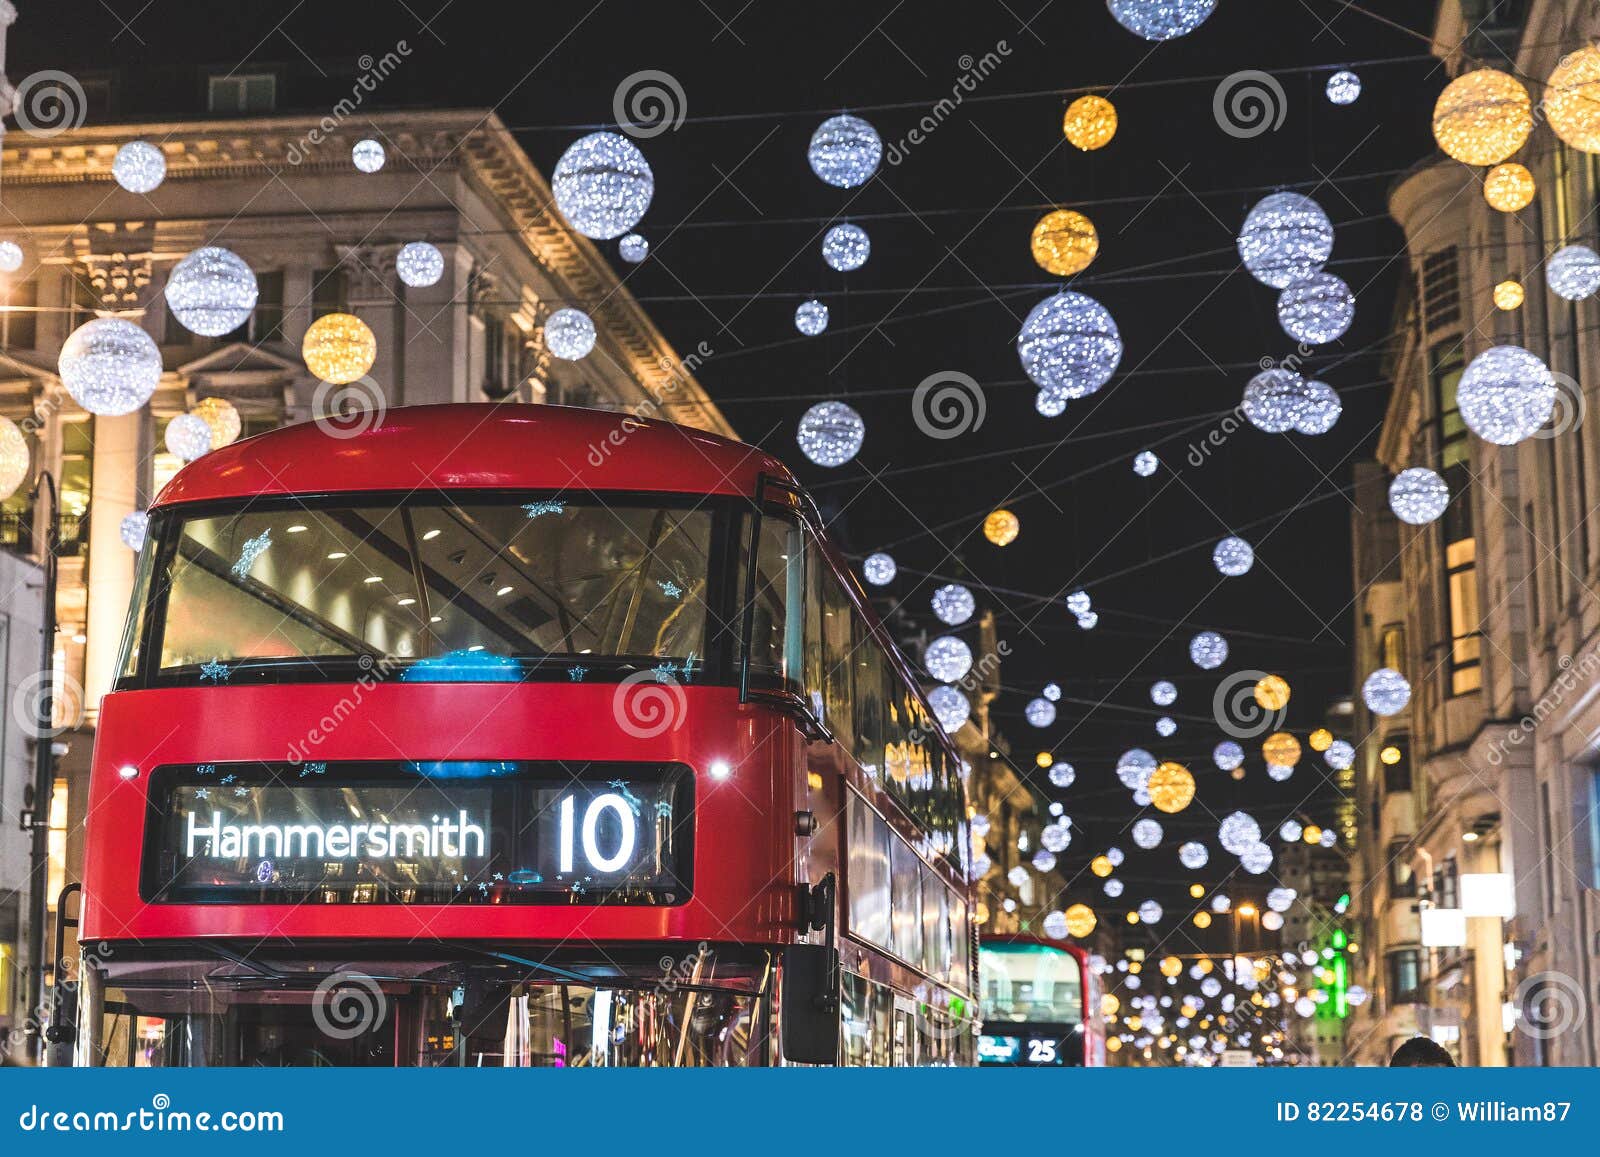 red double decker bus in london during christmas time